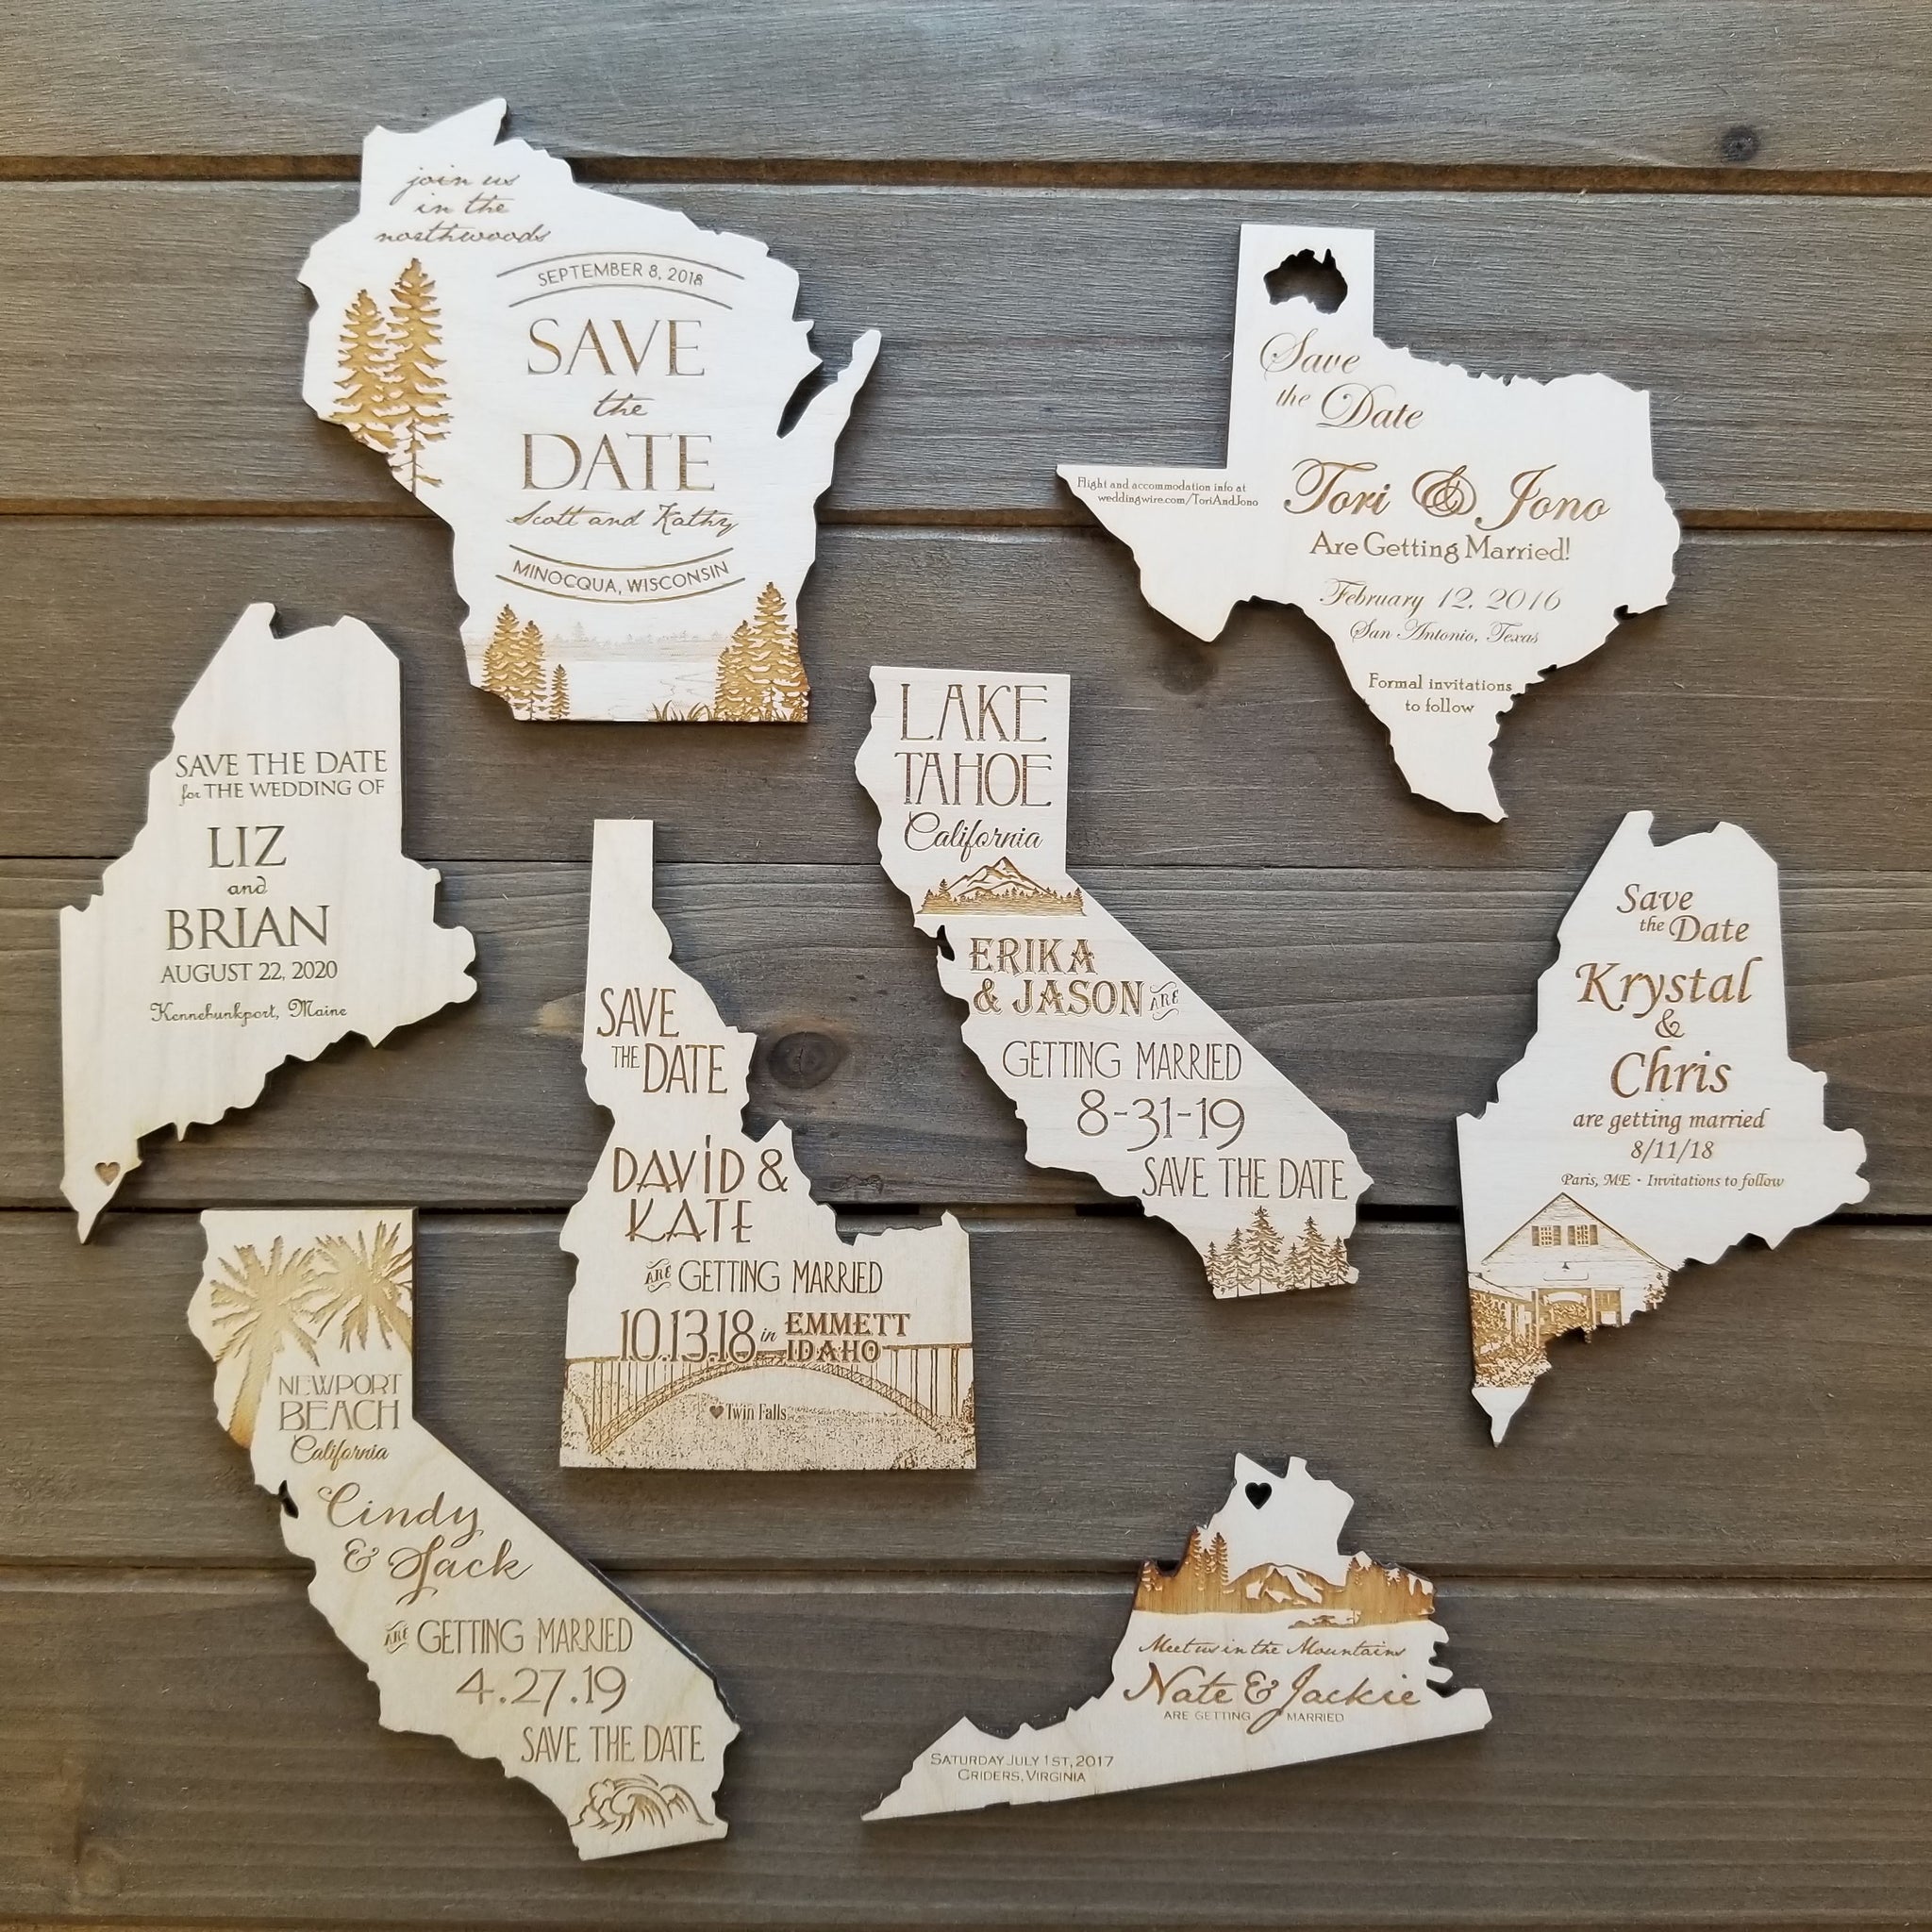 Save the date magnets, save the dates, wedding save the dates